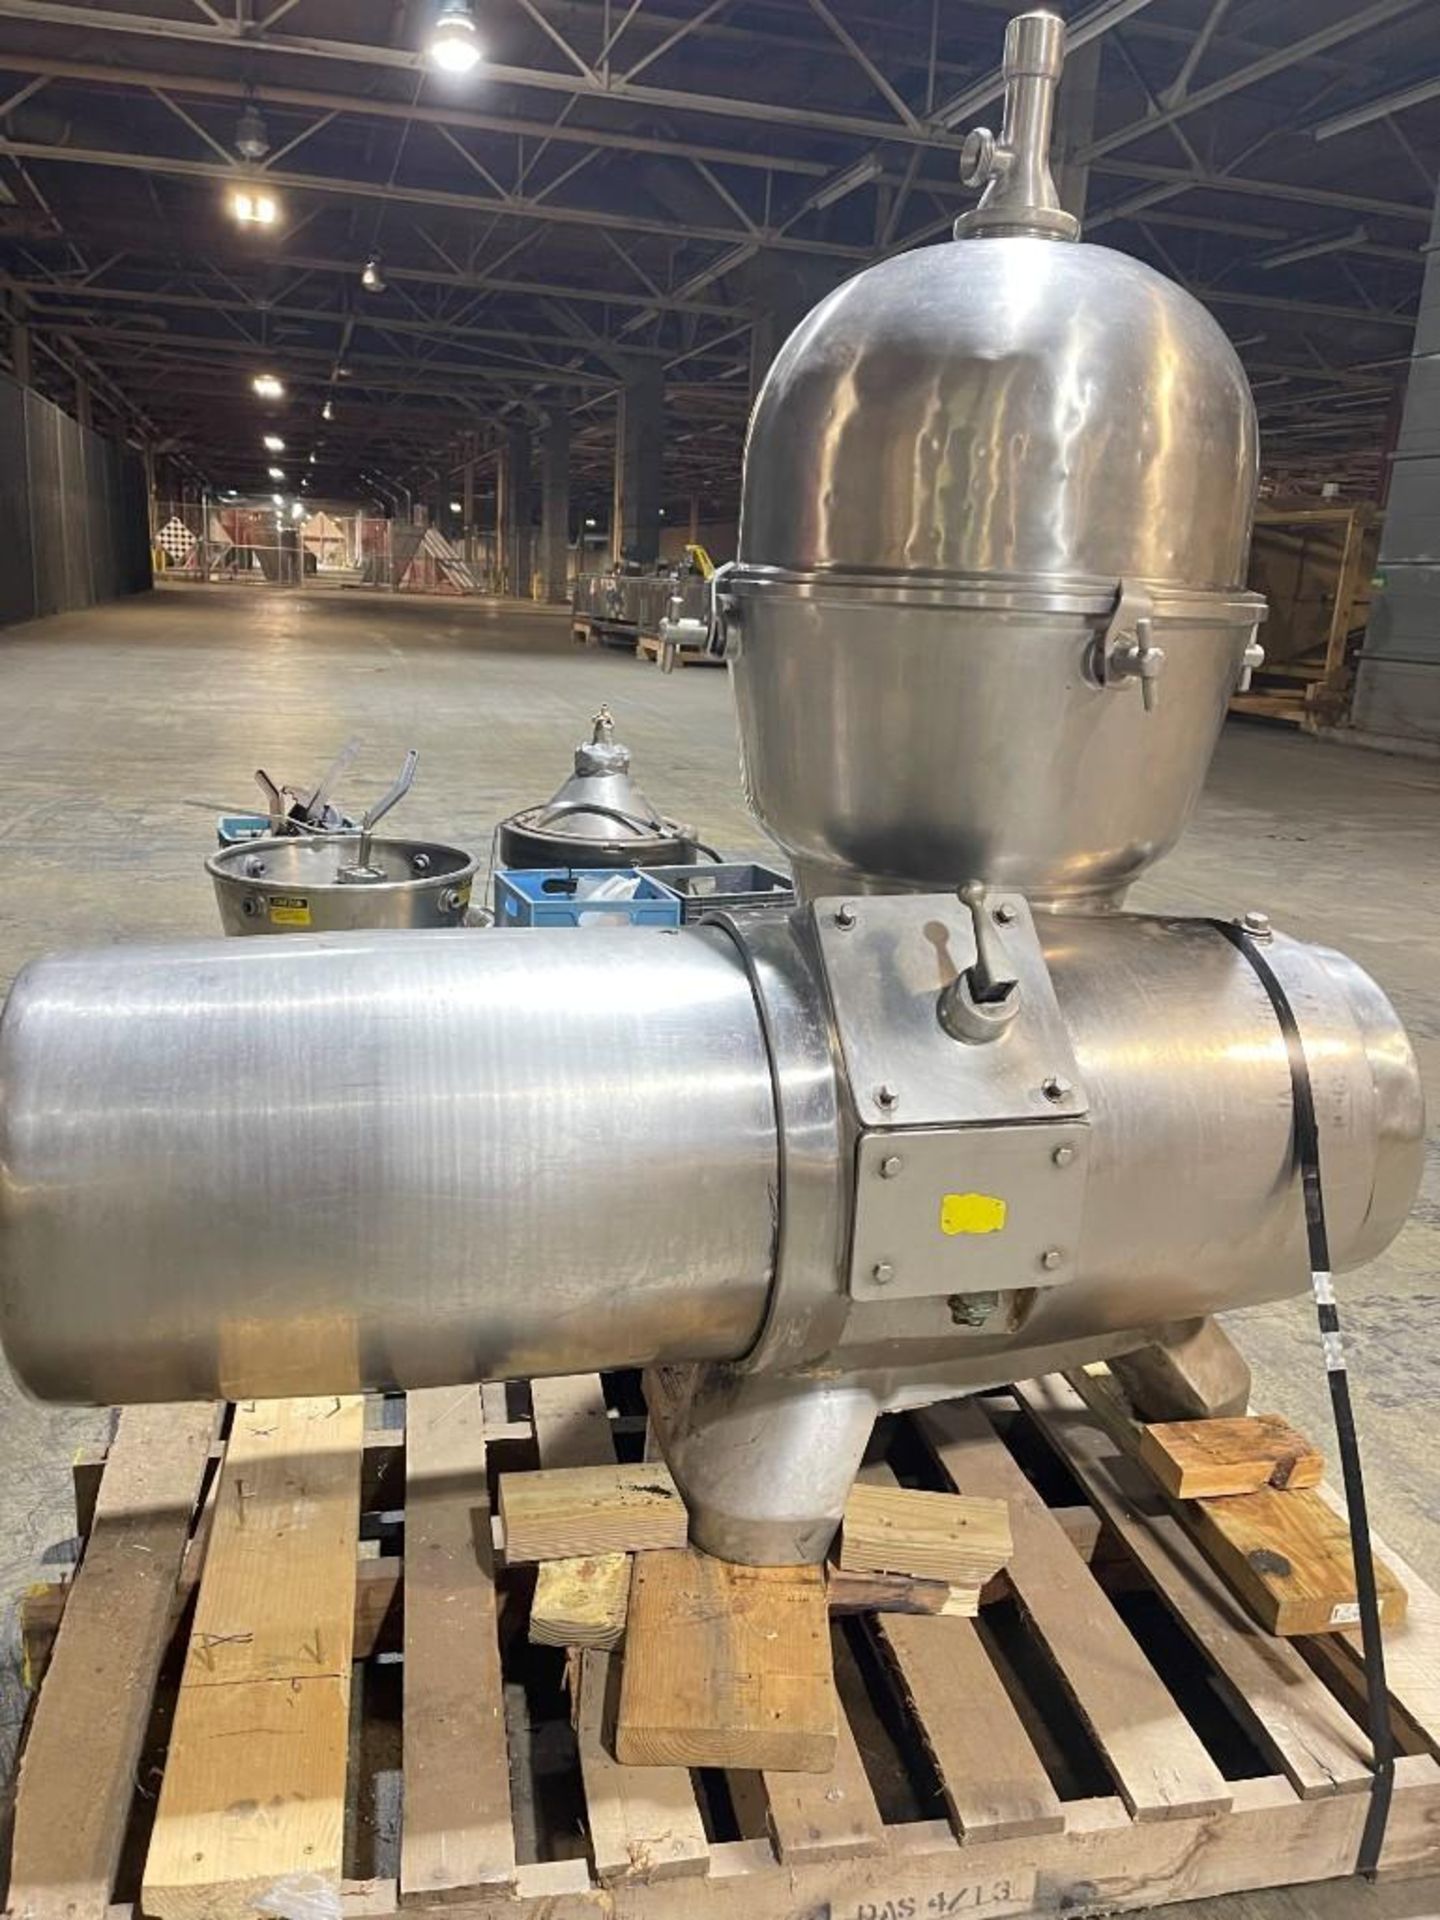 Alfa Laval S/S Separator Model: 510, S/N: 370377, Bowl S/N: 288701 (Location: New Stanton, PA) - Rig - Image 2 of 4